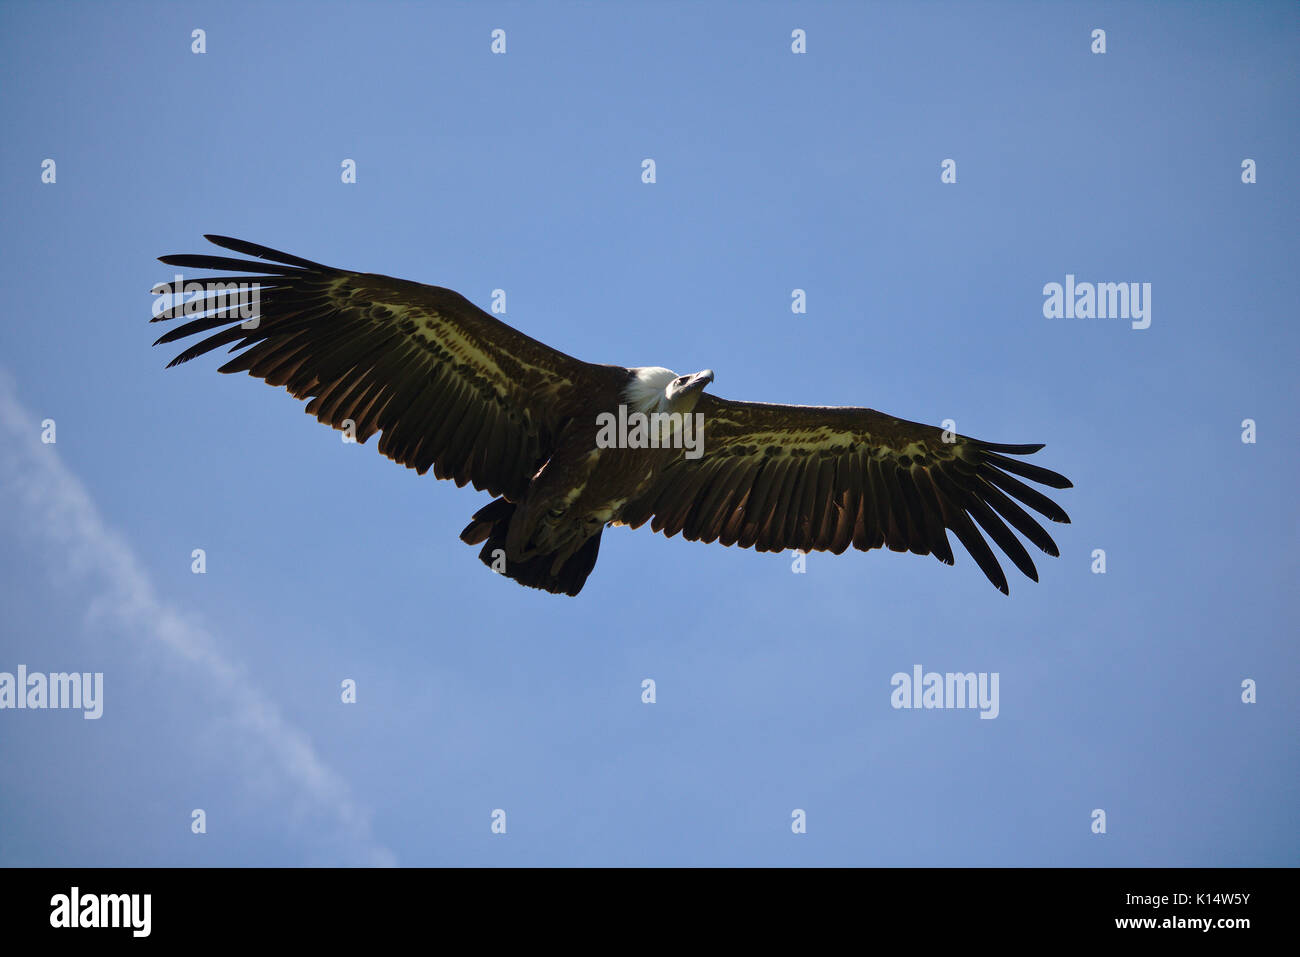 Griffon vulture in flight with wings spread Stock Photo